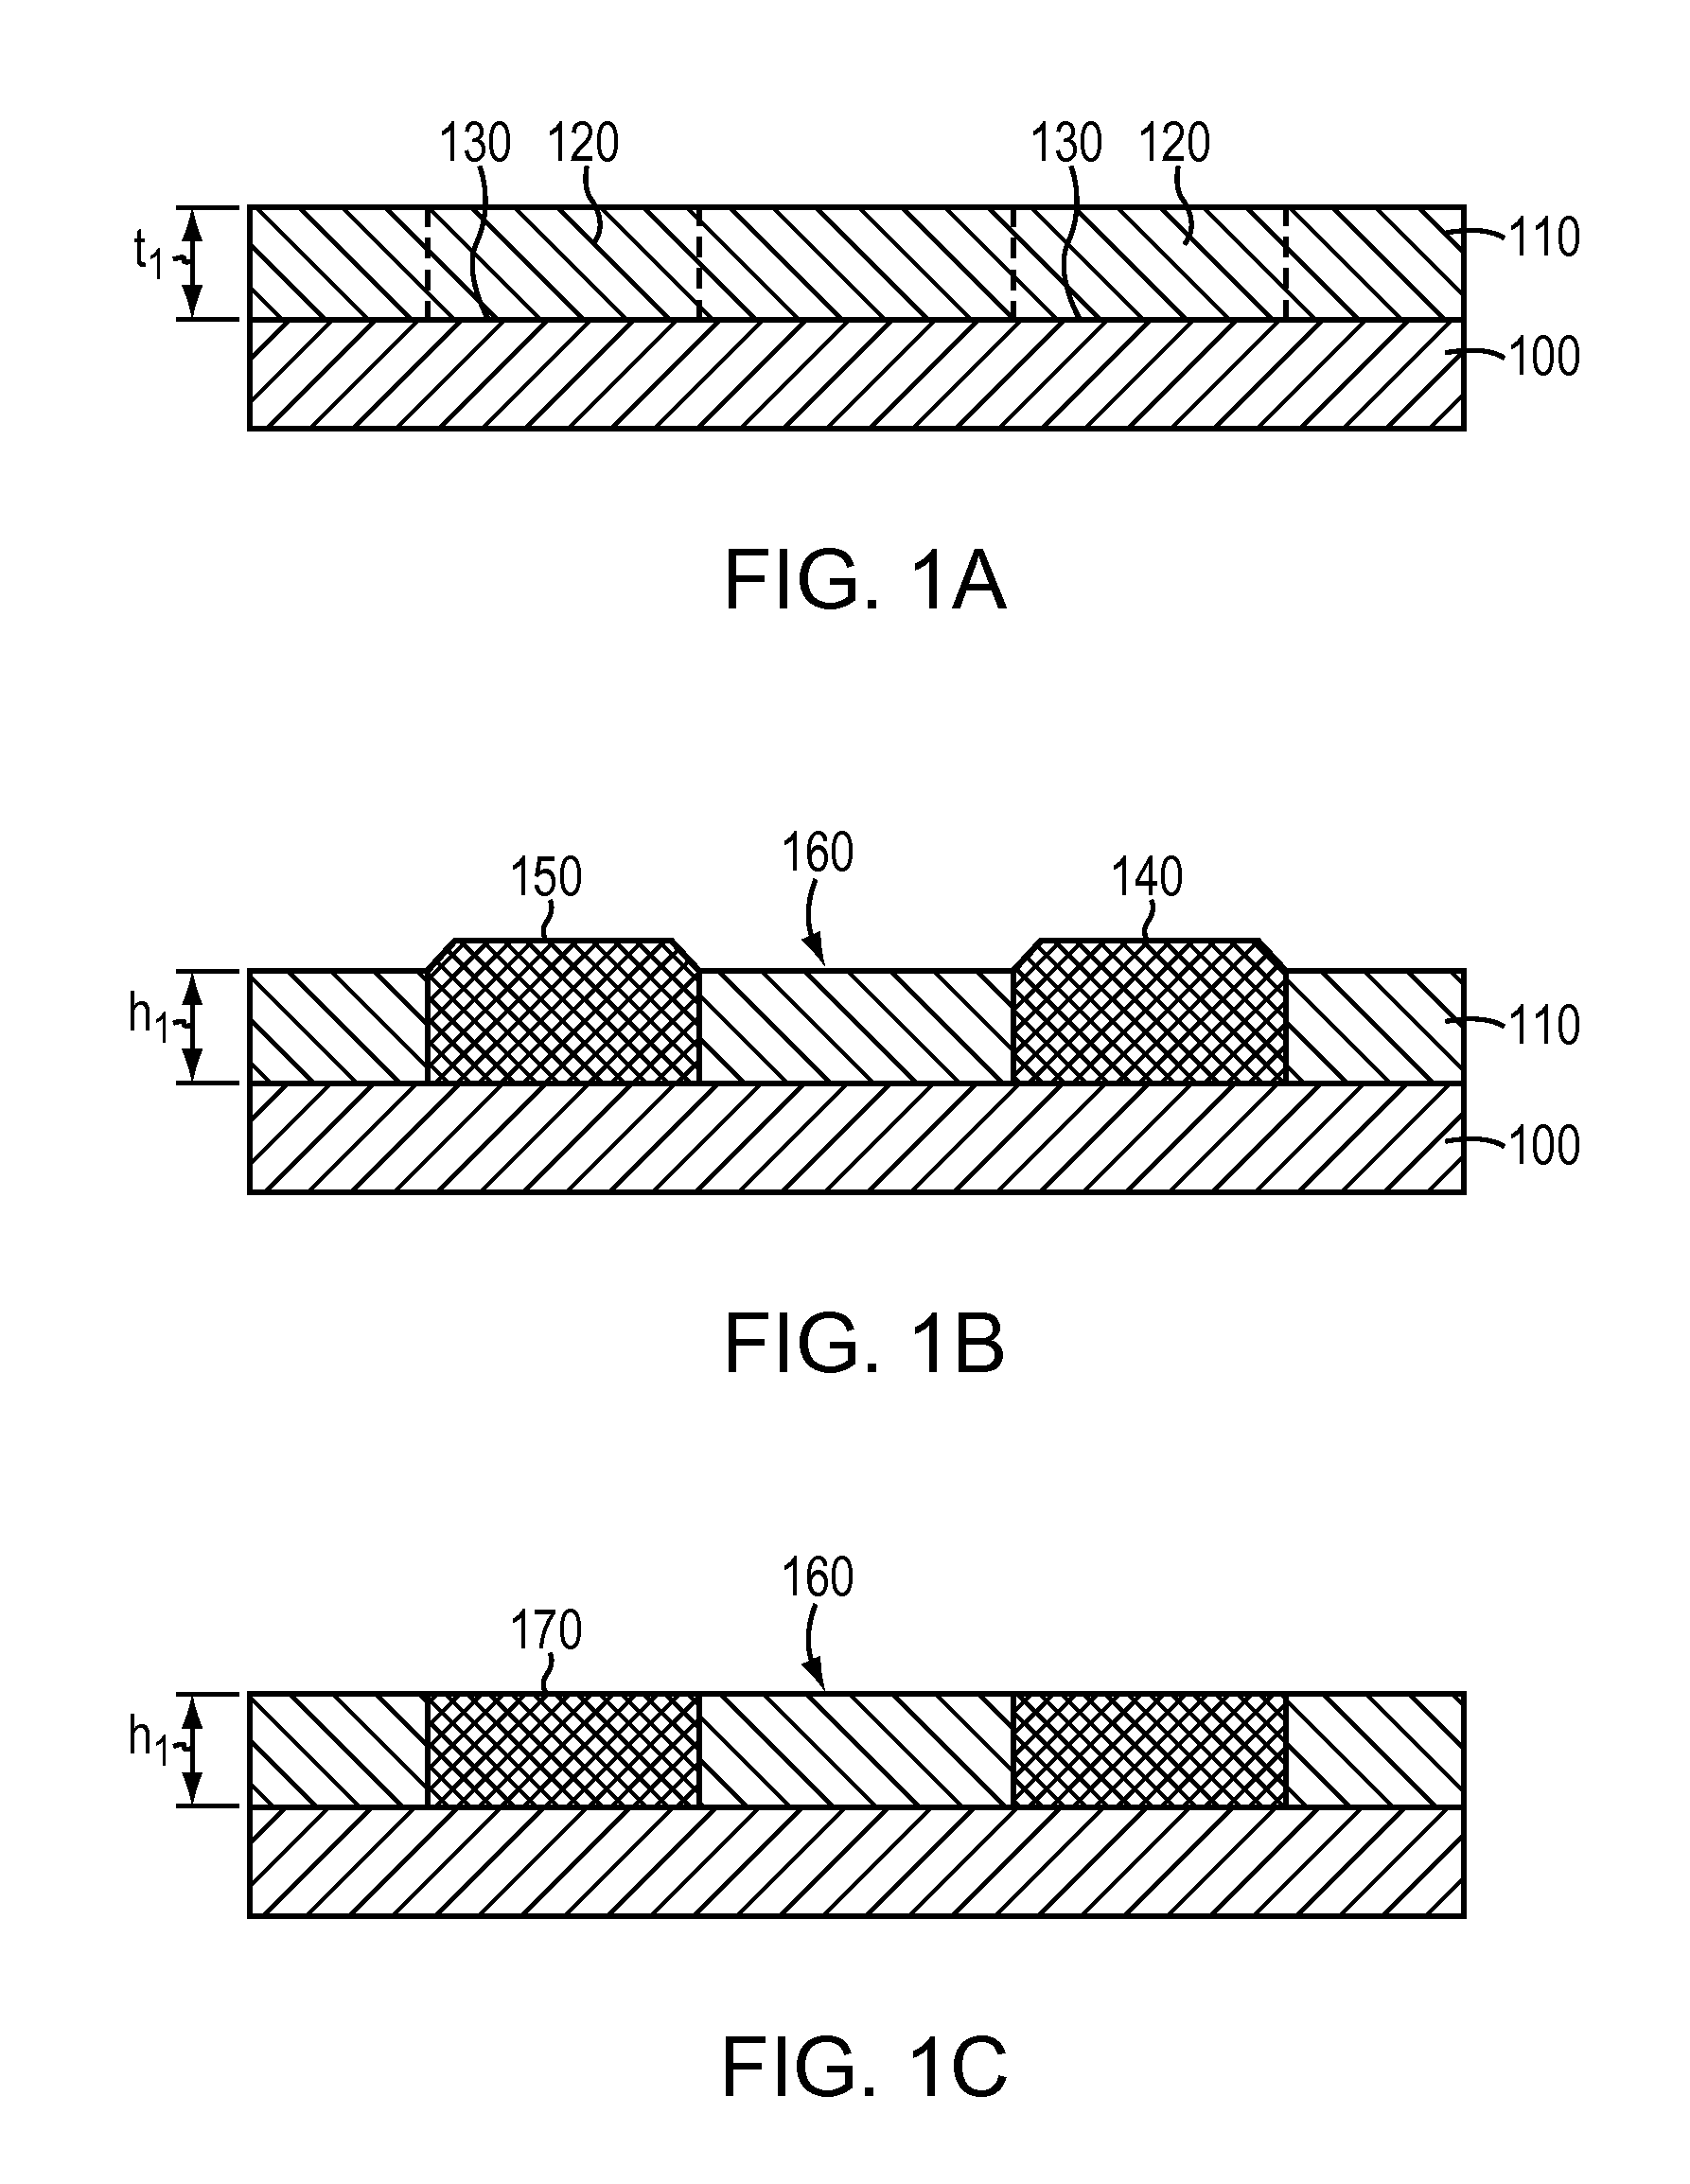 Solutions for integrated circuit integration of alternative active area materials